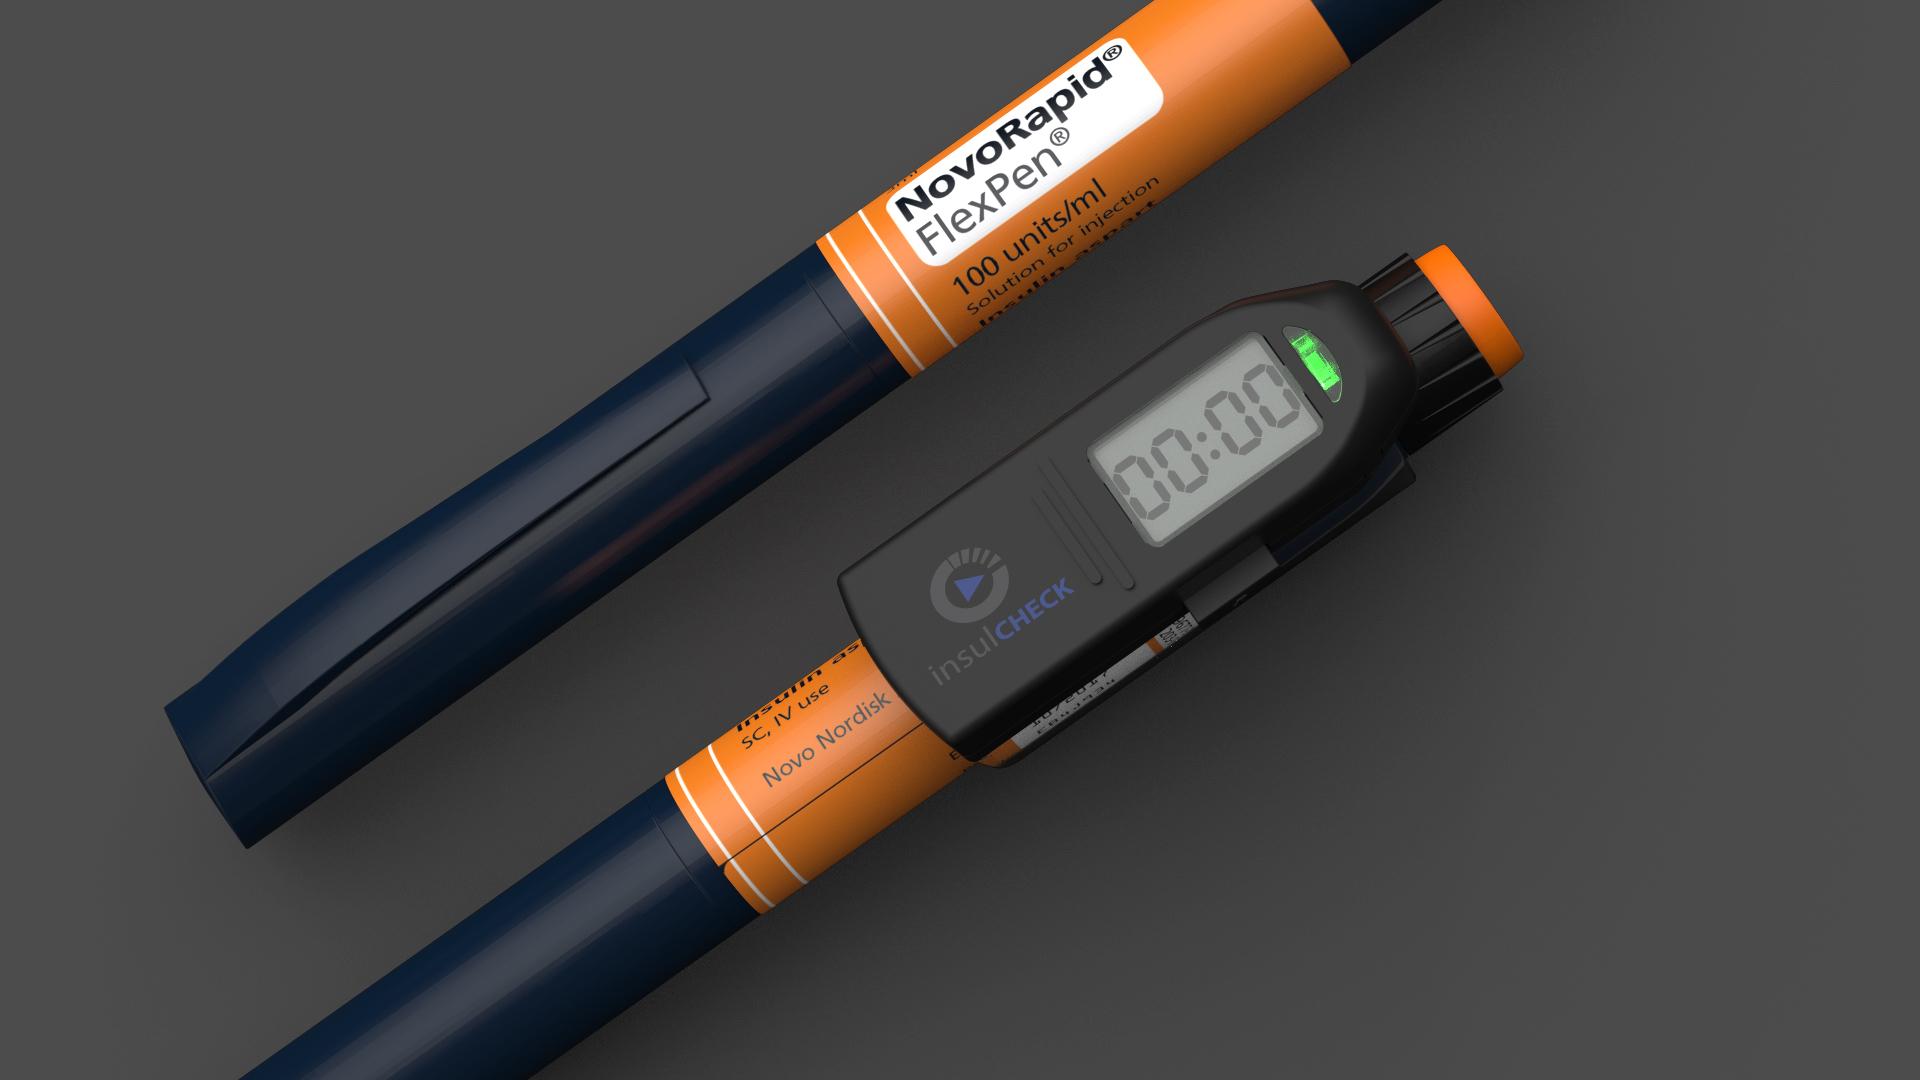 Insulcheck memory aid for insulin injection pen